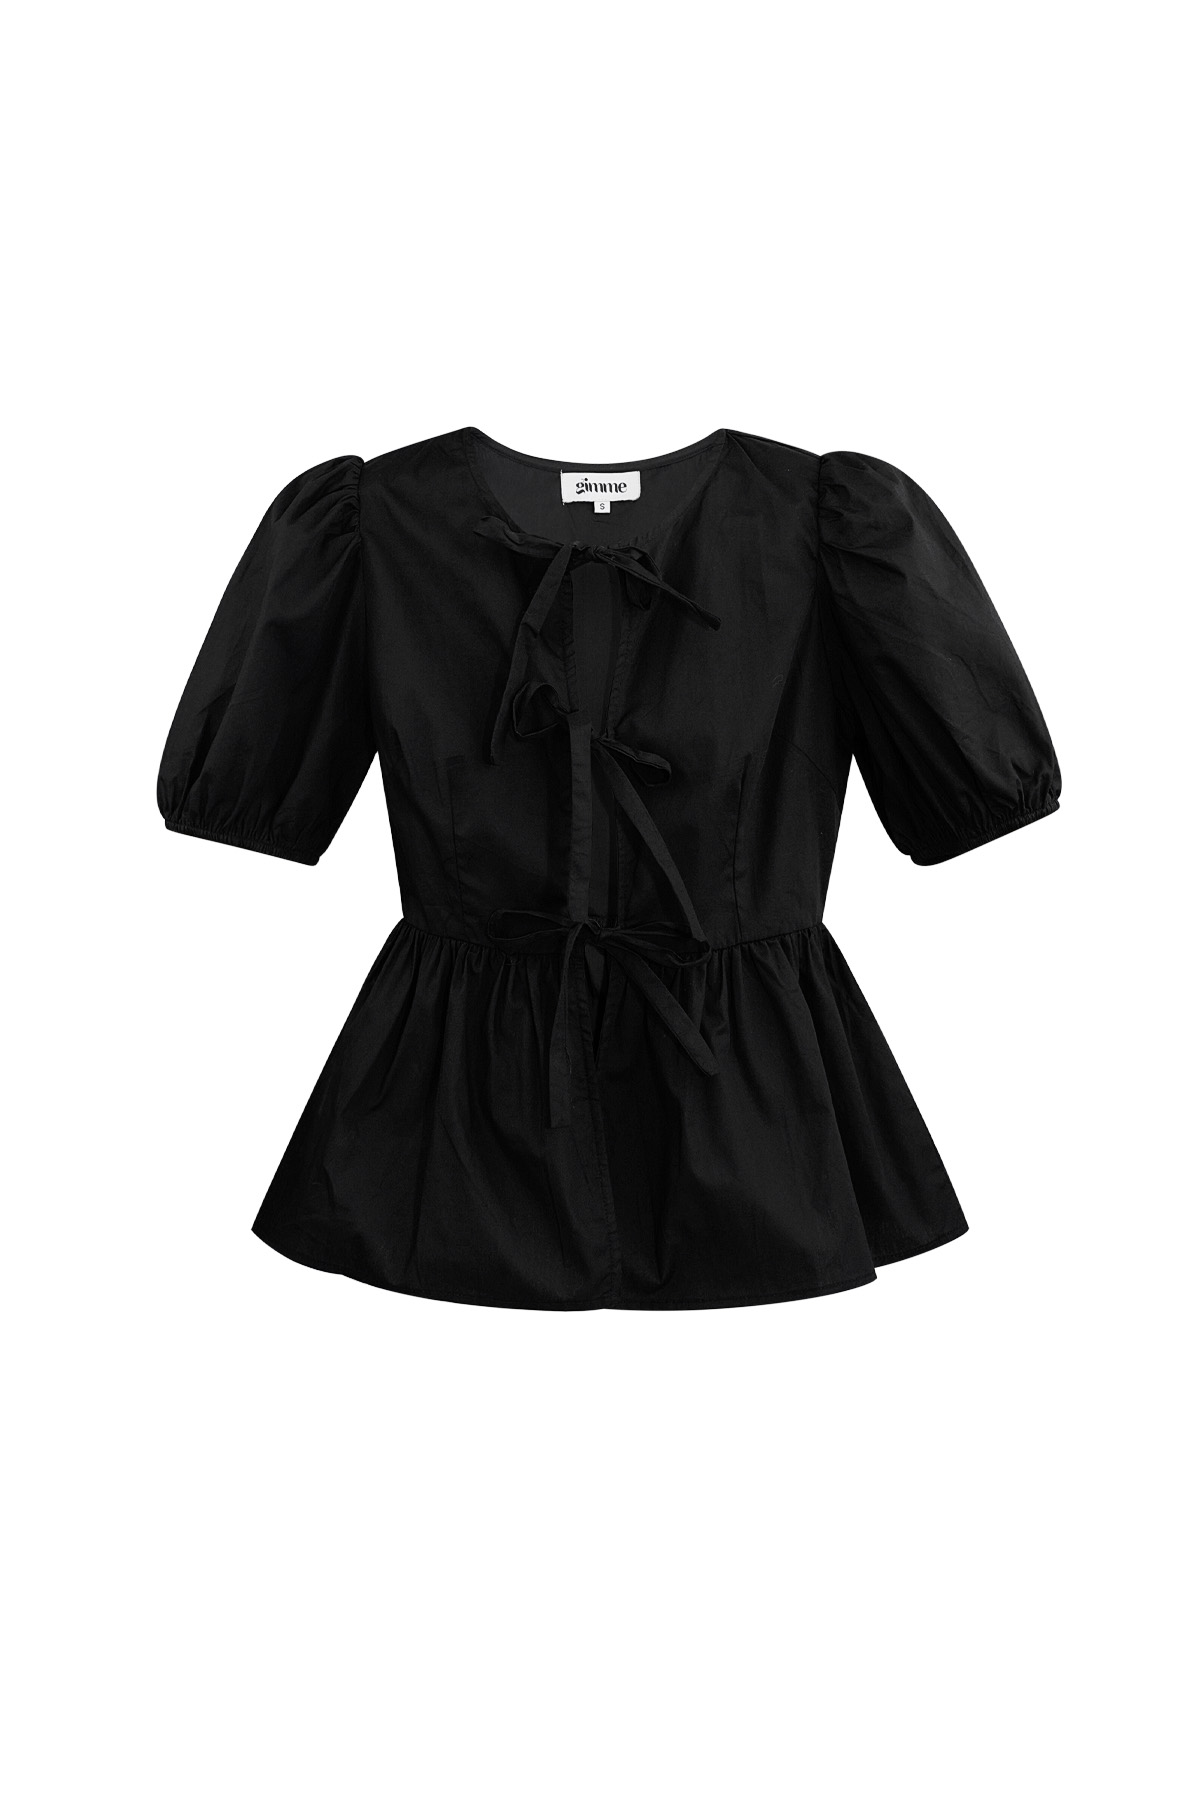 Must-have peplum blouse with bows - black